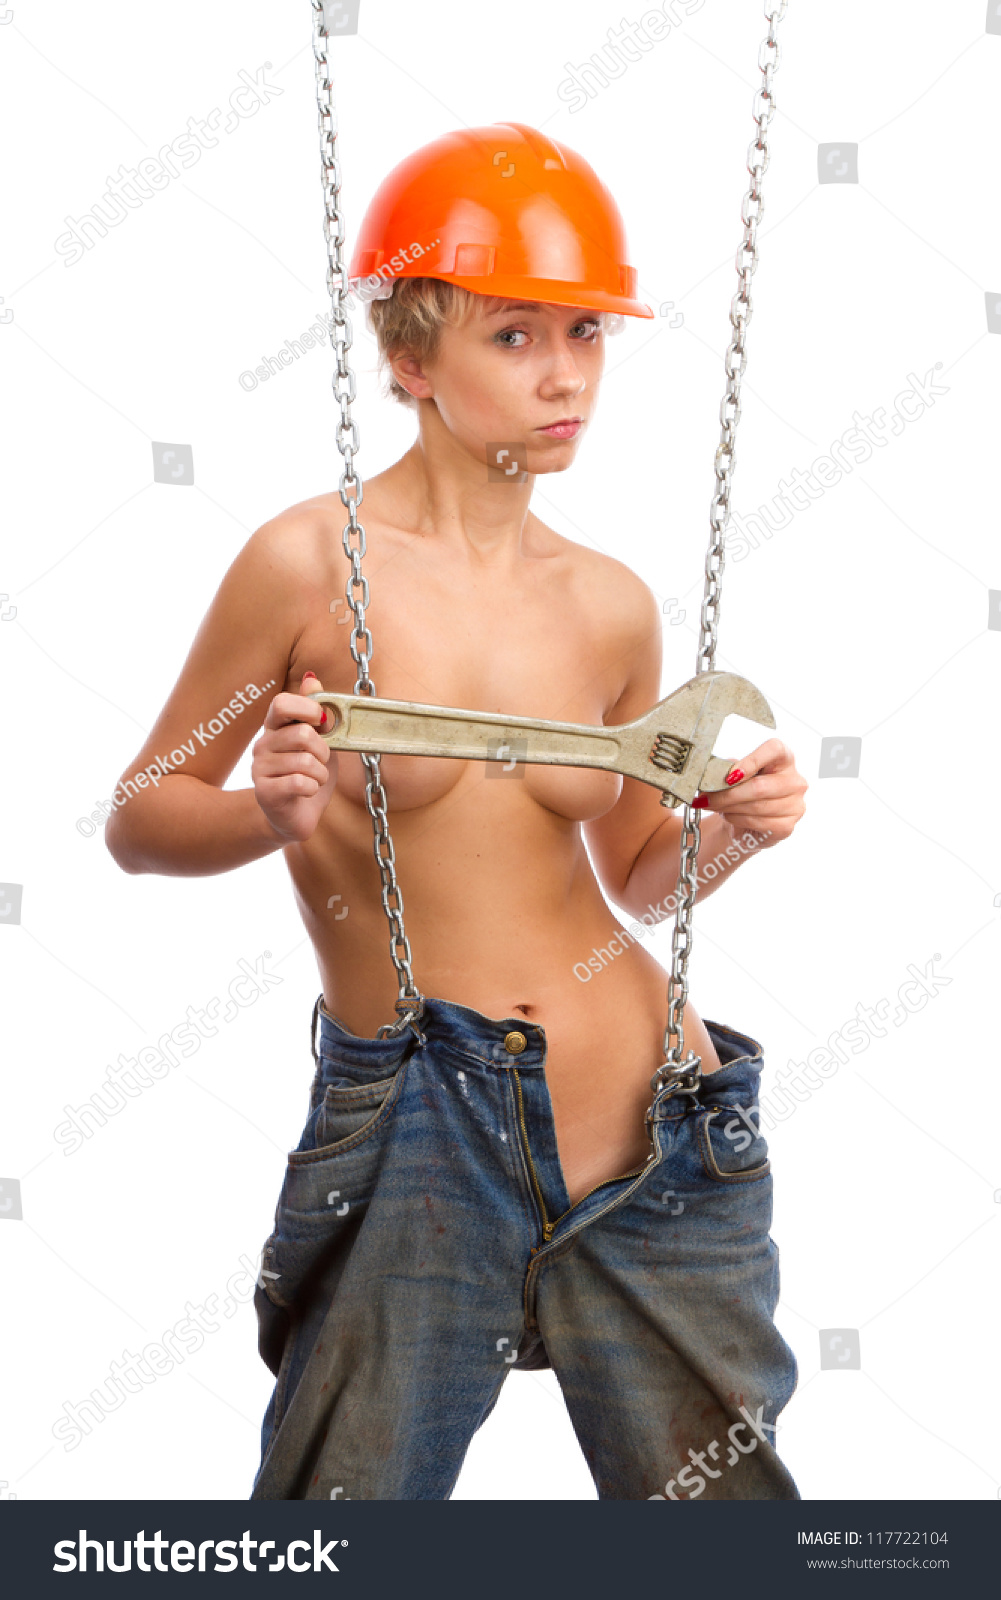 stock-photo-beautiful-half-naked-woman-in-a-helmet-in-dirty-jeans-with-a-wrench-with-a-chain-on-a-white-117722104.jpg